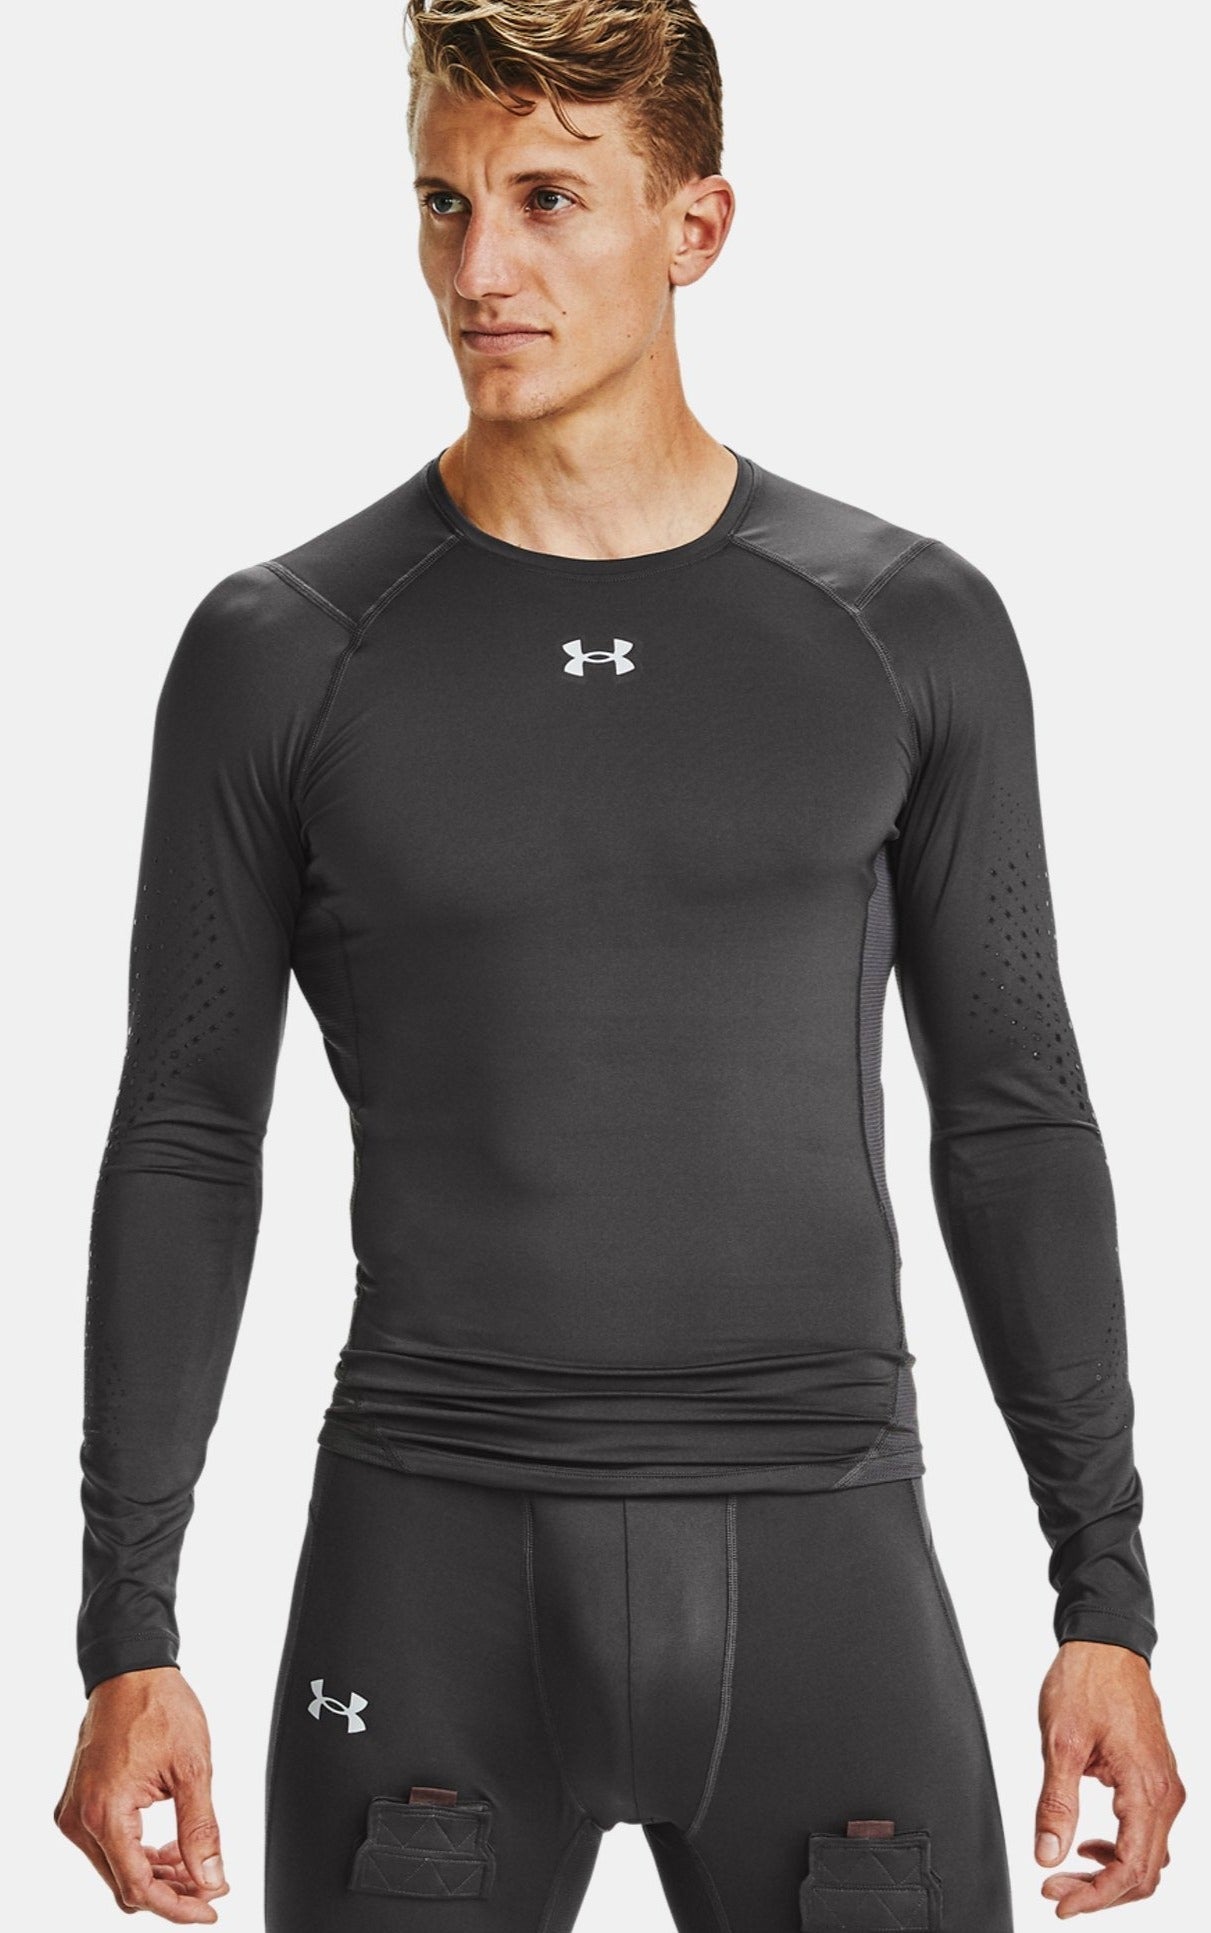 UNDER ARMOUR CHANDAIL MANCHES LONGUES FITTED GRIPPY LONG SLEEVE HOMME –